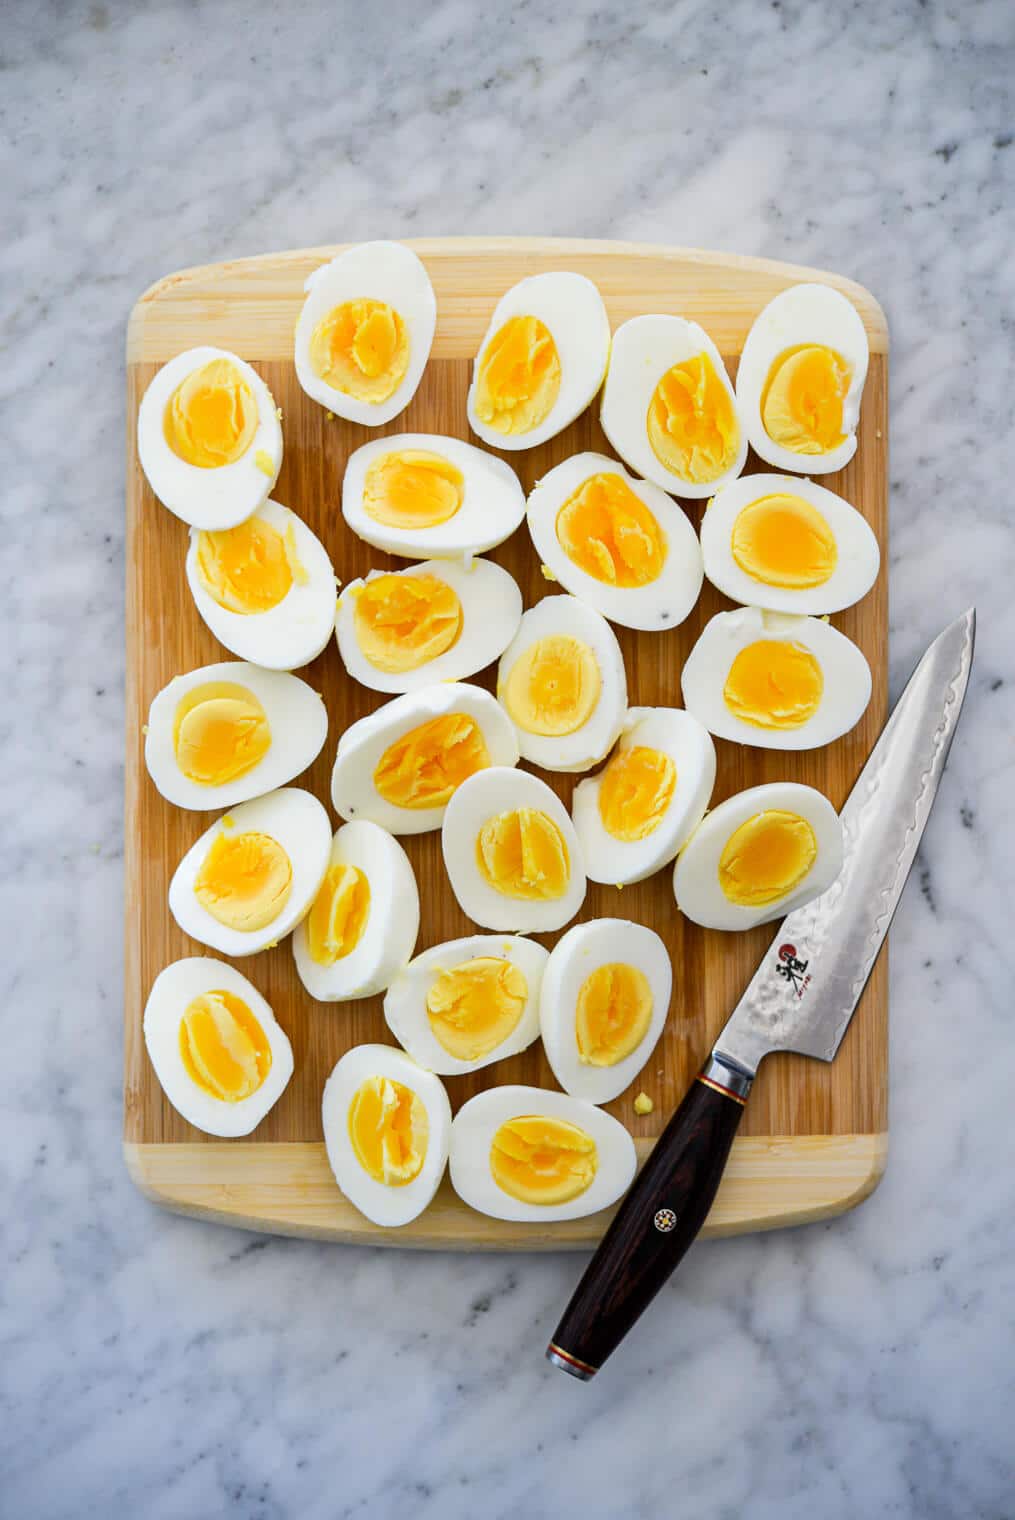 Wooden cutting board with silver knife with black handle sitting next to hard boiled eggs cut in half.